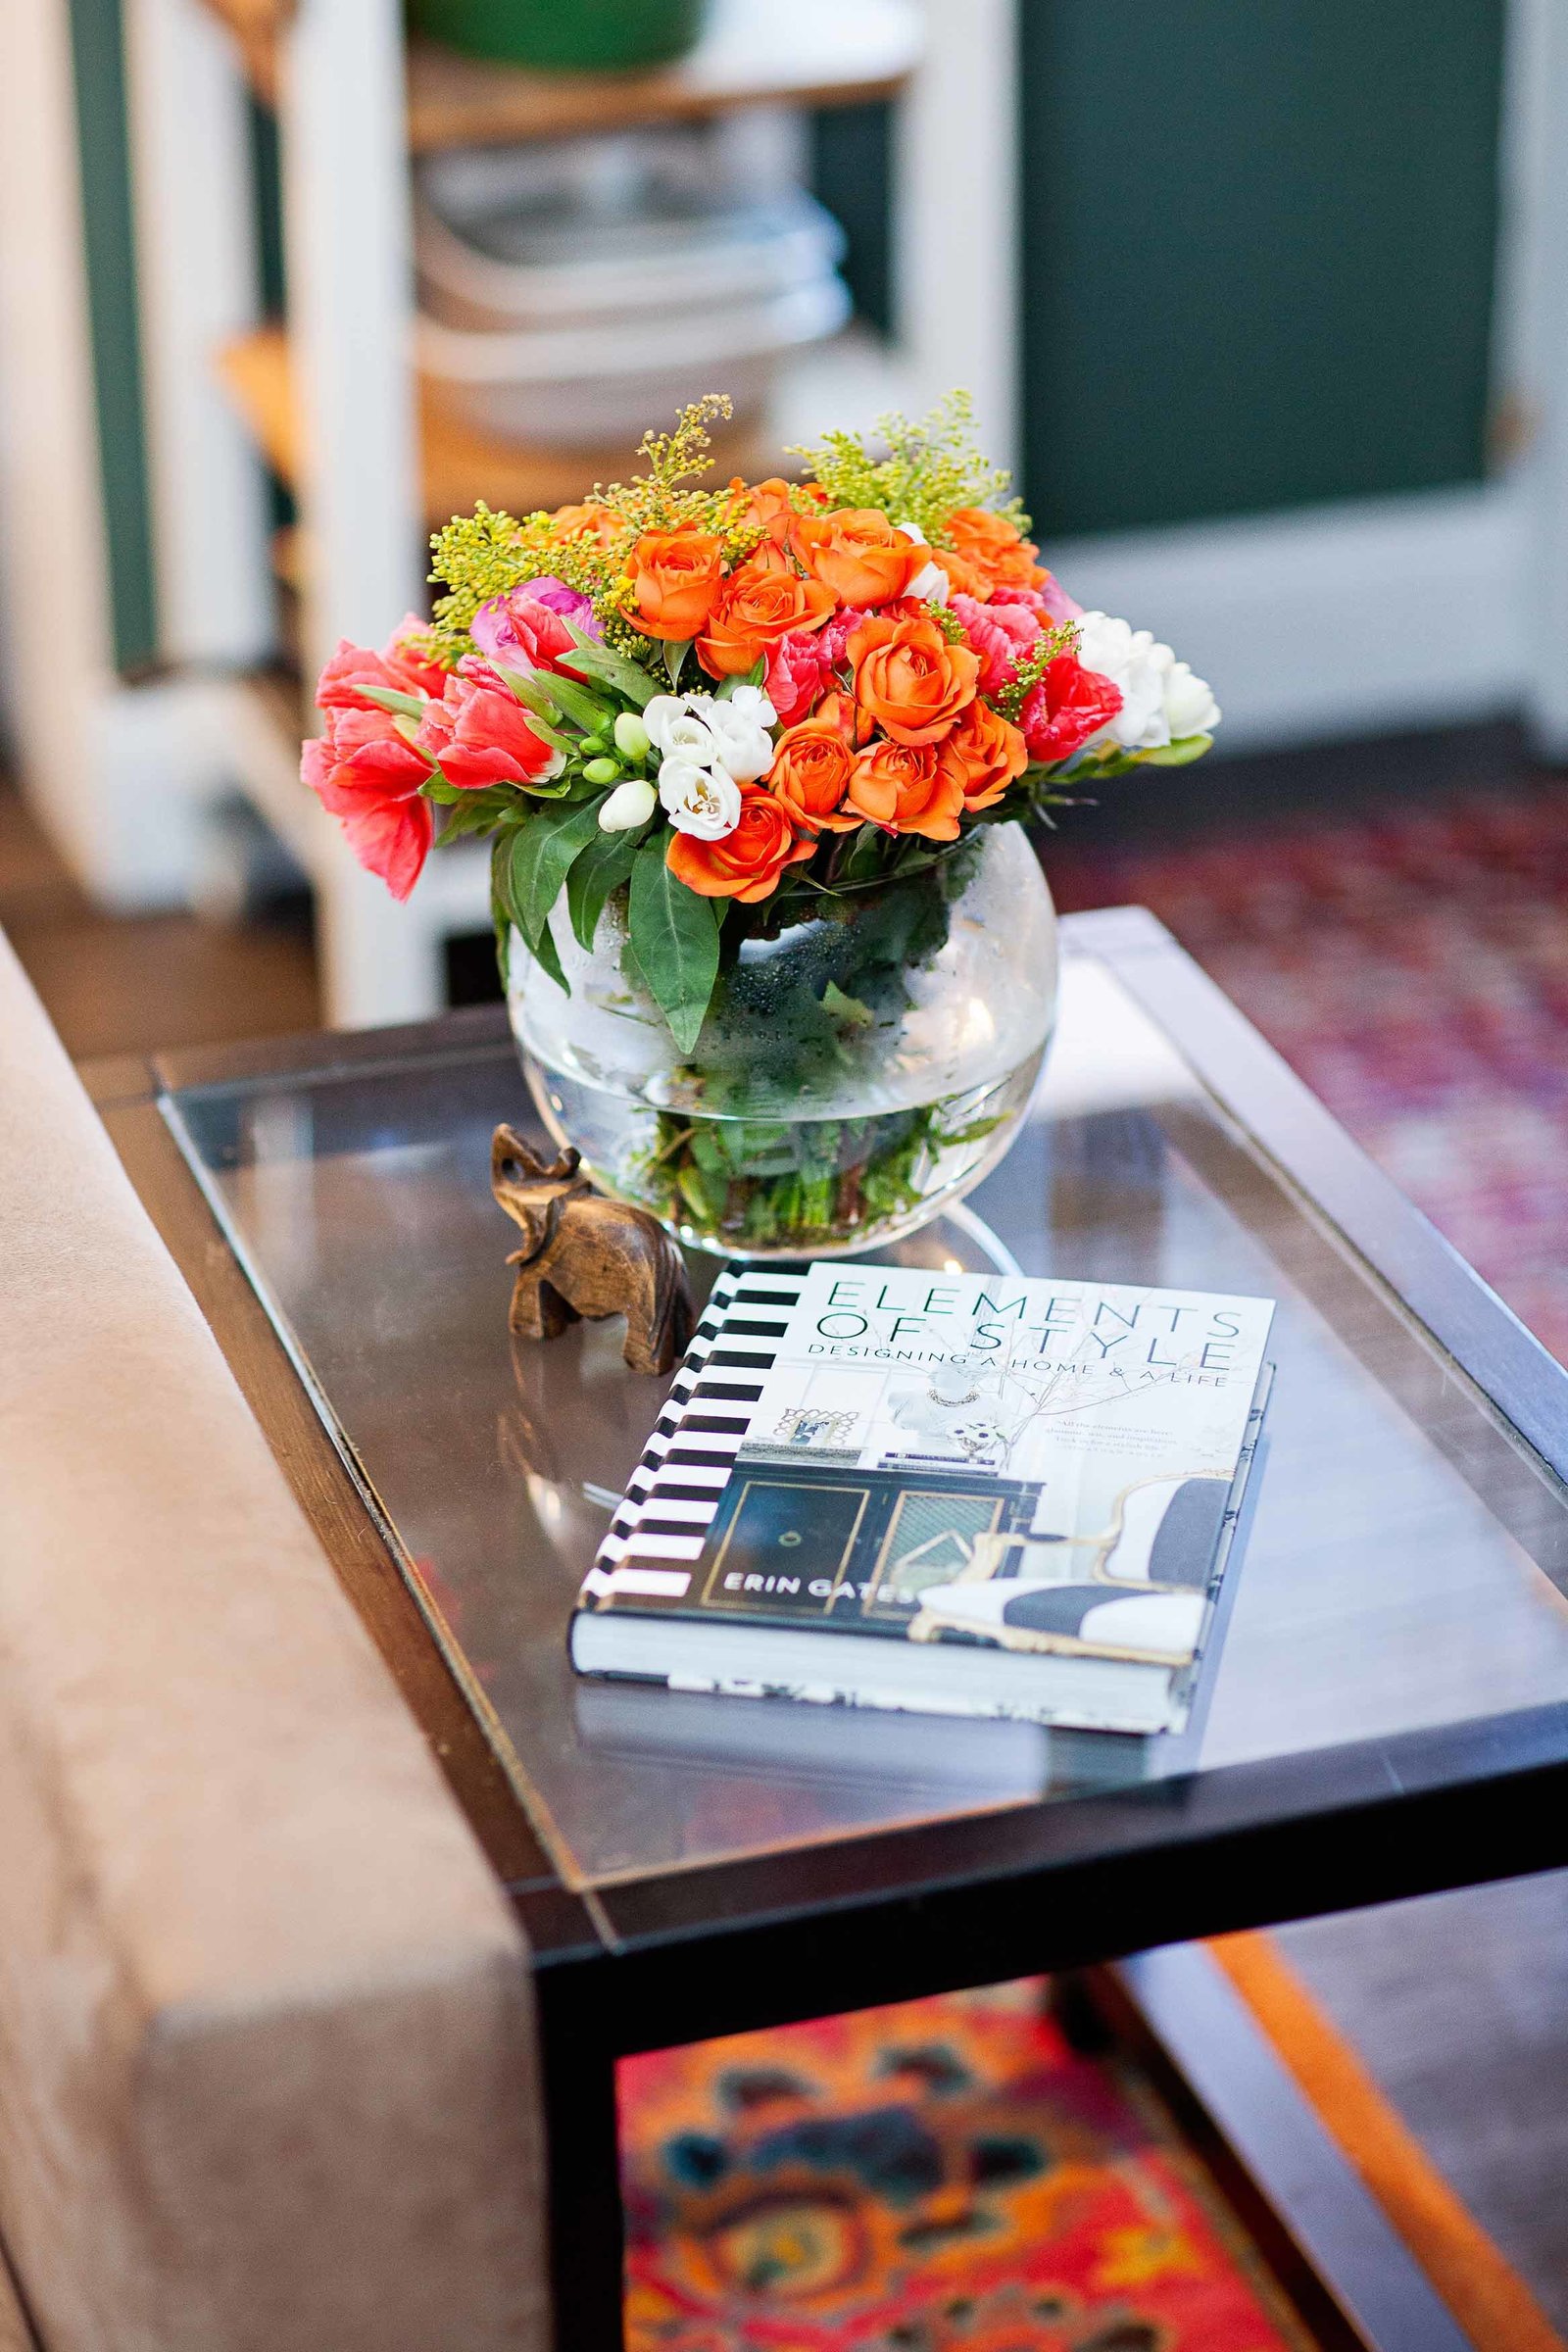 A glass end table with a book and fresh flowers.